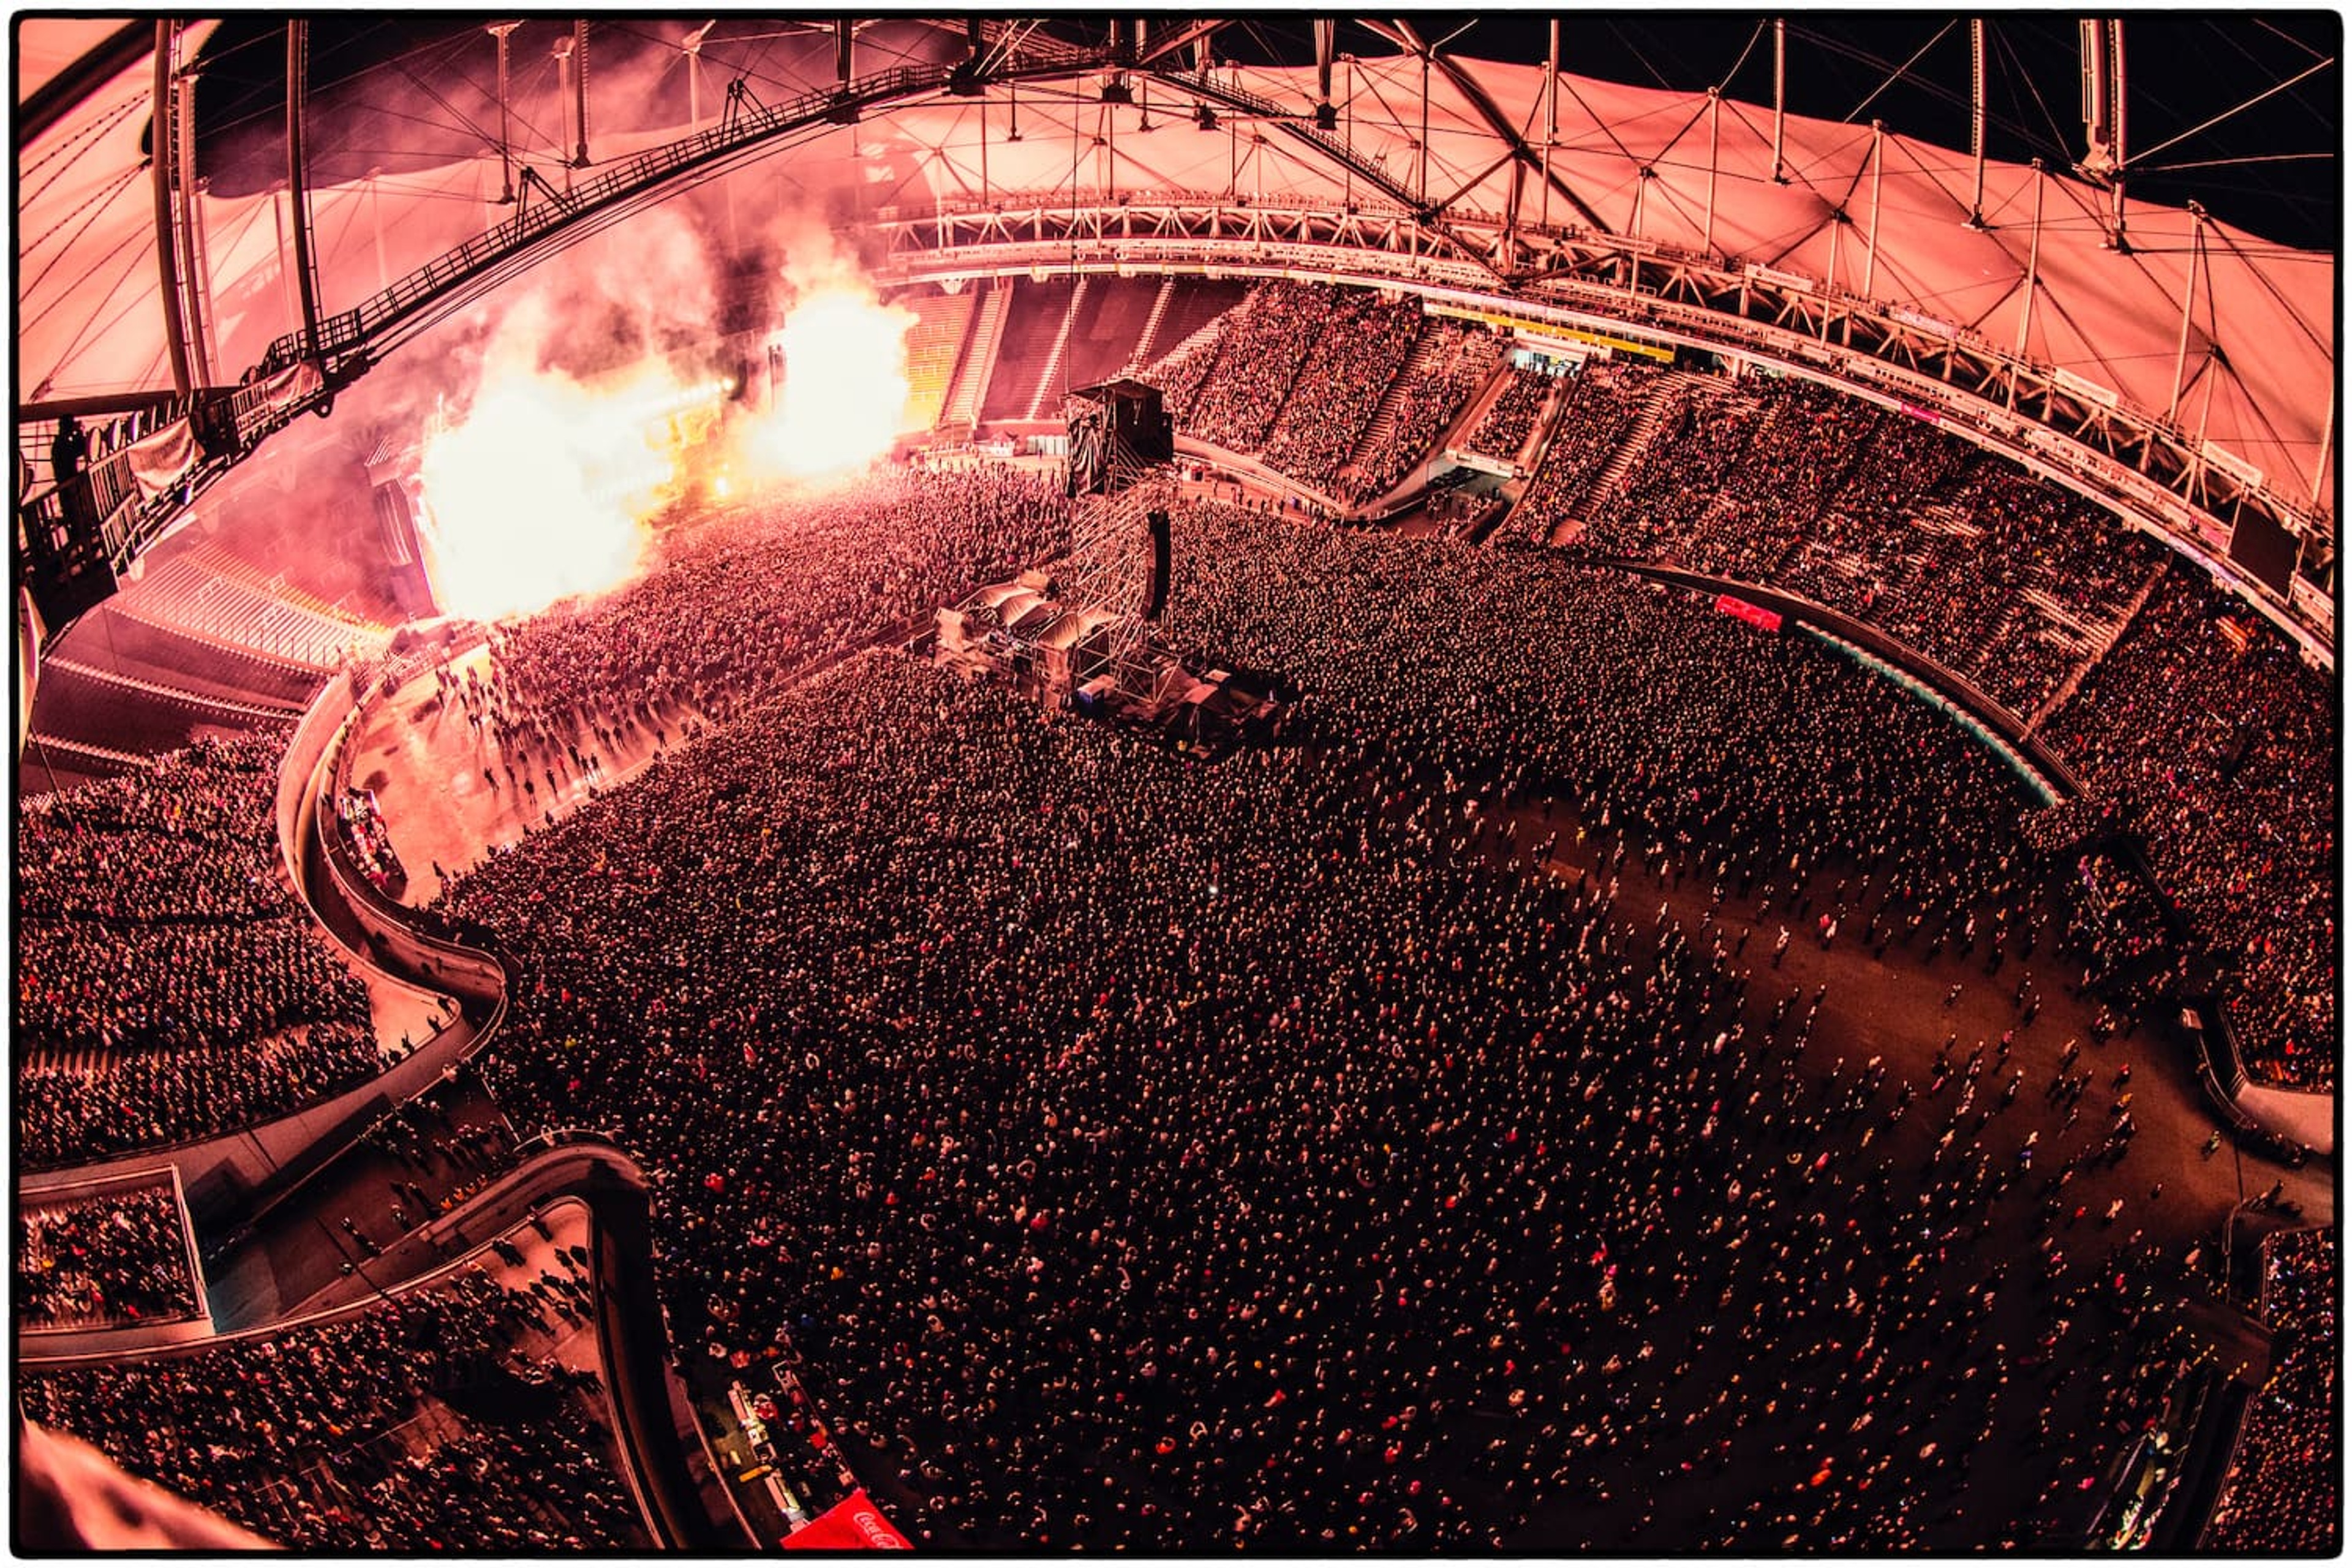 Photo of Paul performing 'Live and Let Die' with pyro-technics at Estadio Unico de la Plata, Buenos Aires in 2016.